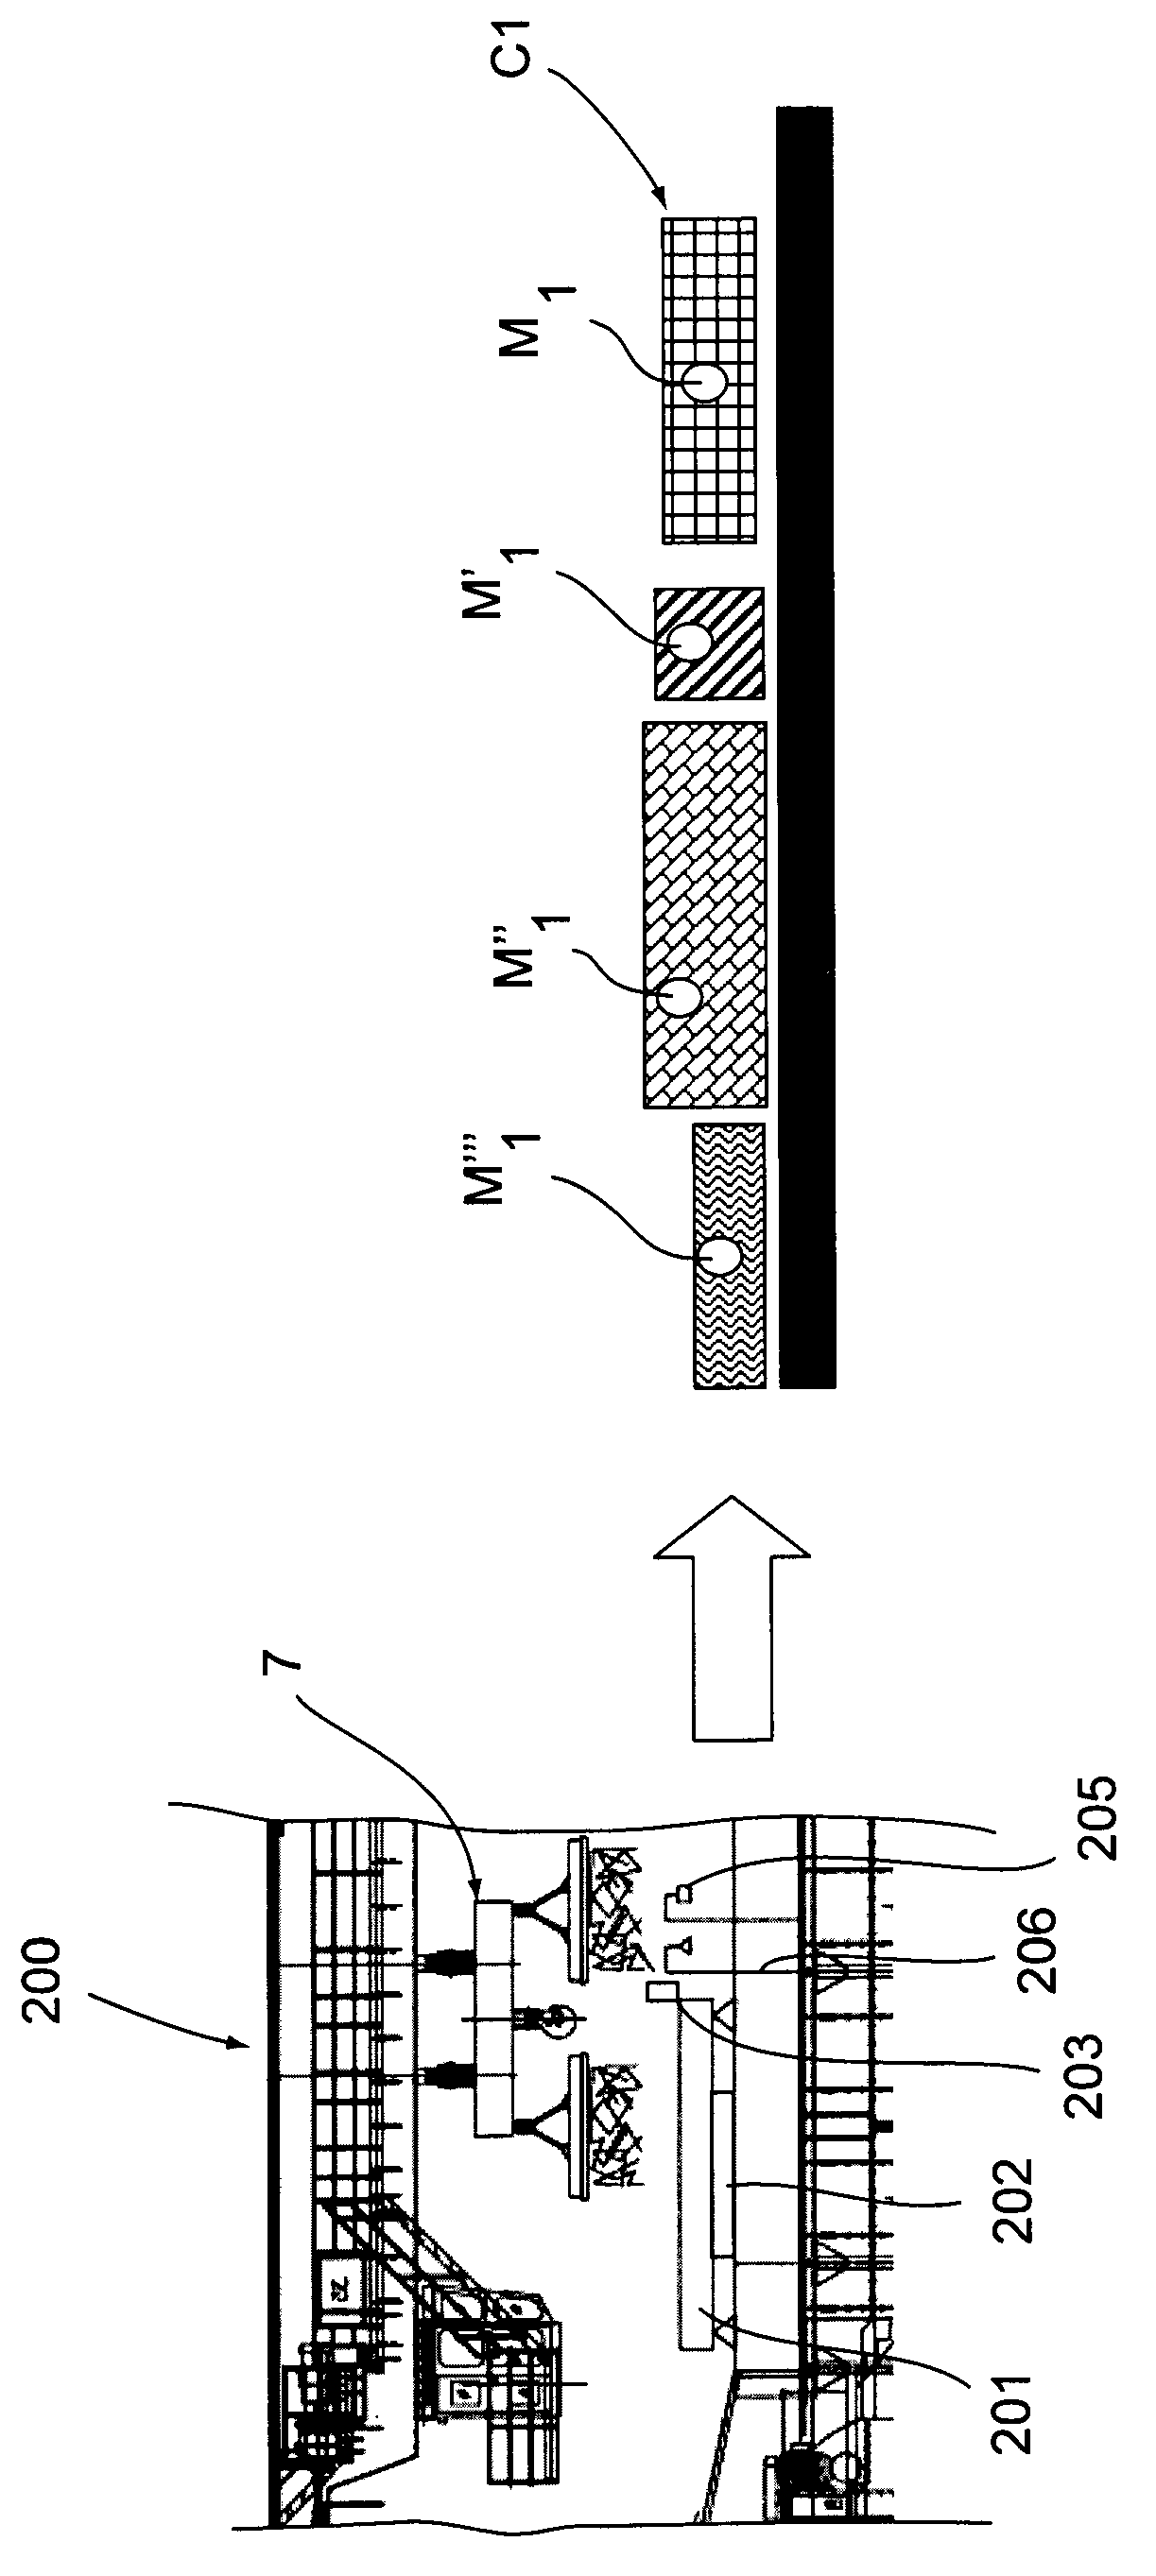 Method and control and tracking system of the charge of material transported by a continuous supply conveyor of a metallurgical furnace, particularly an electric furnace for the production of steel